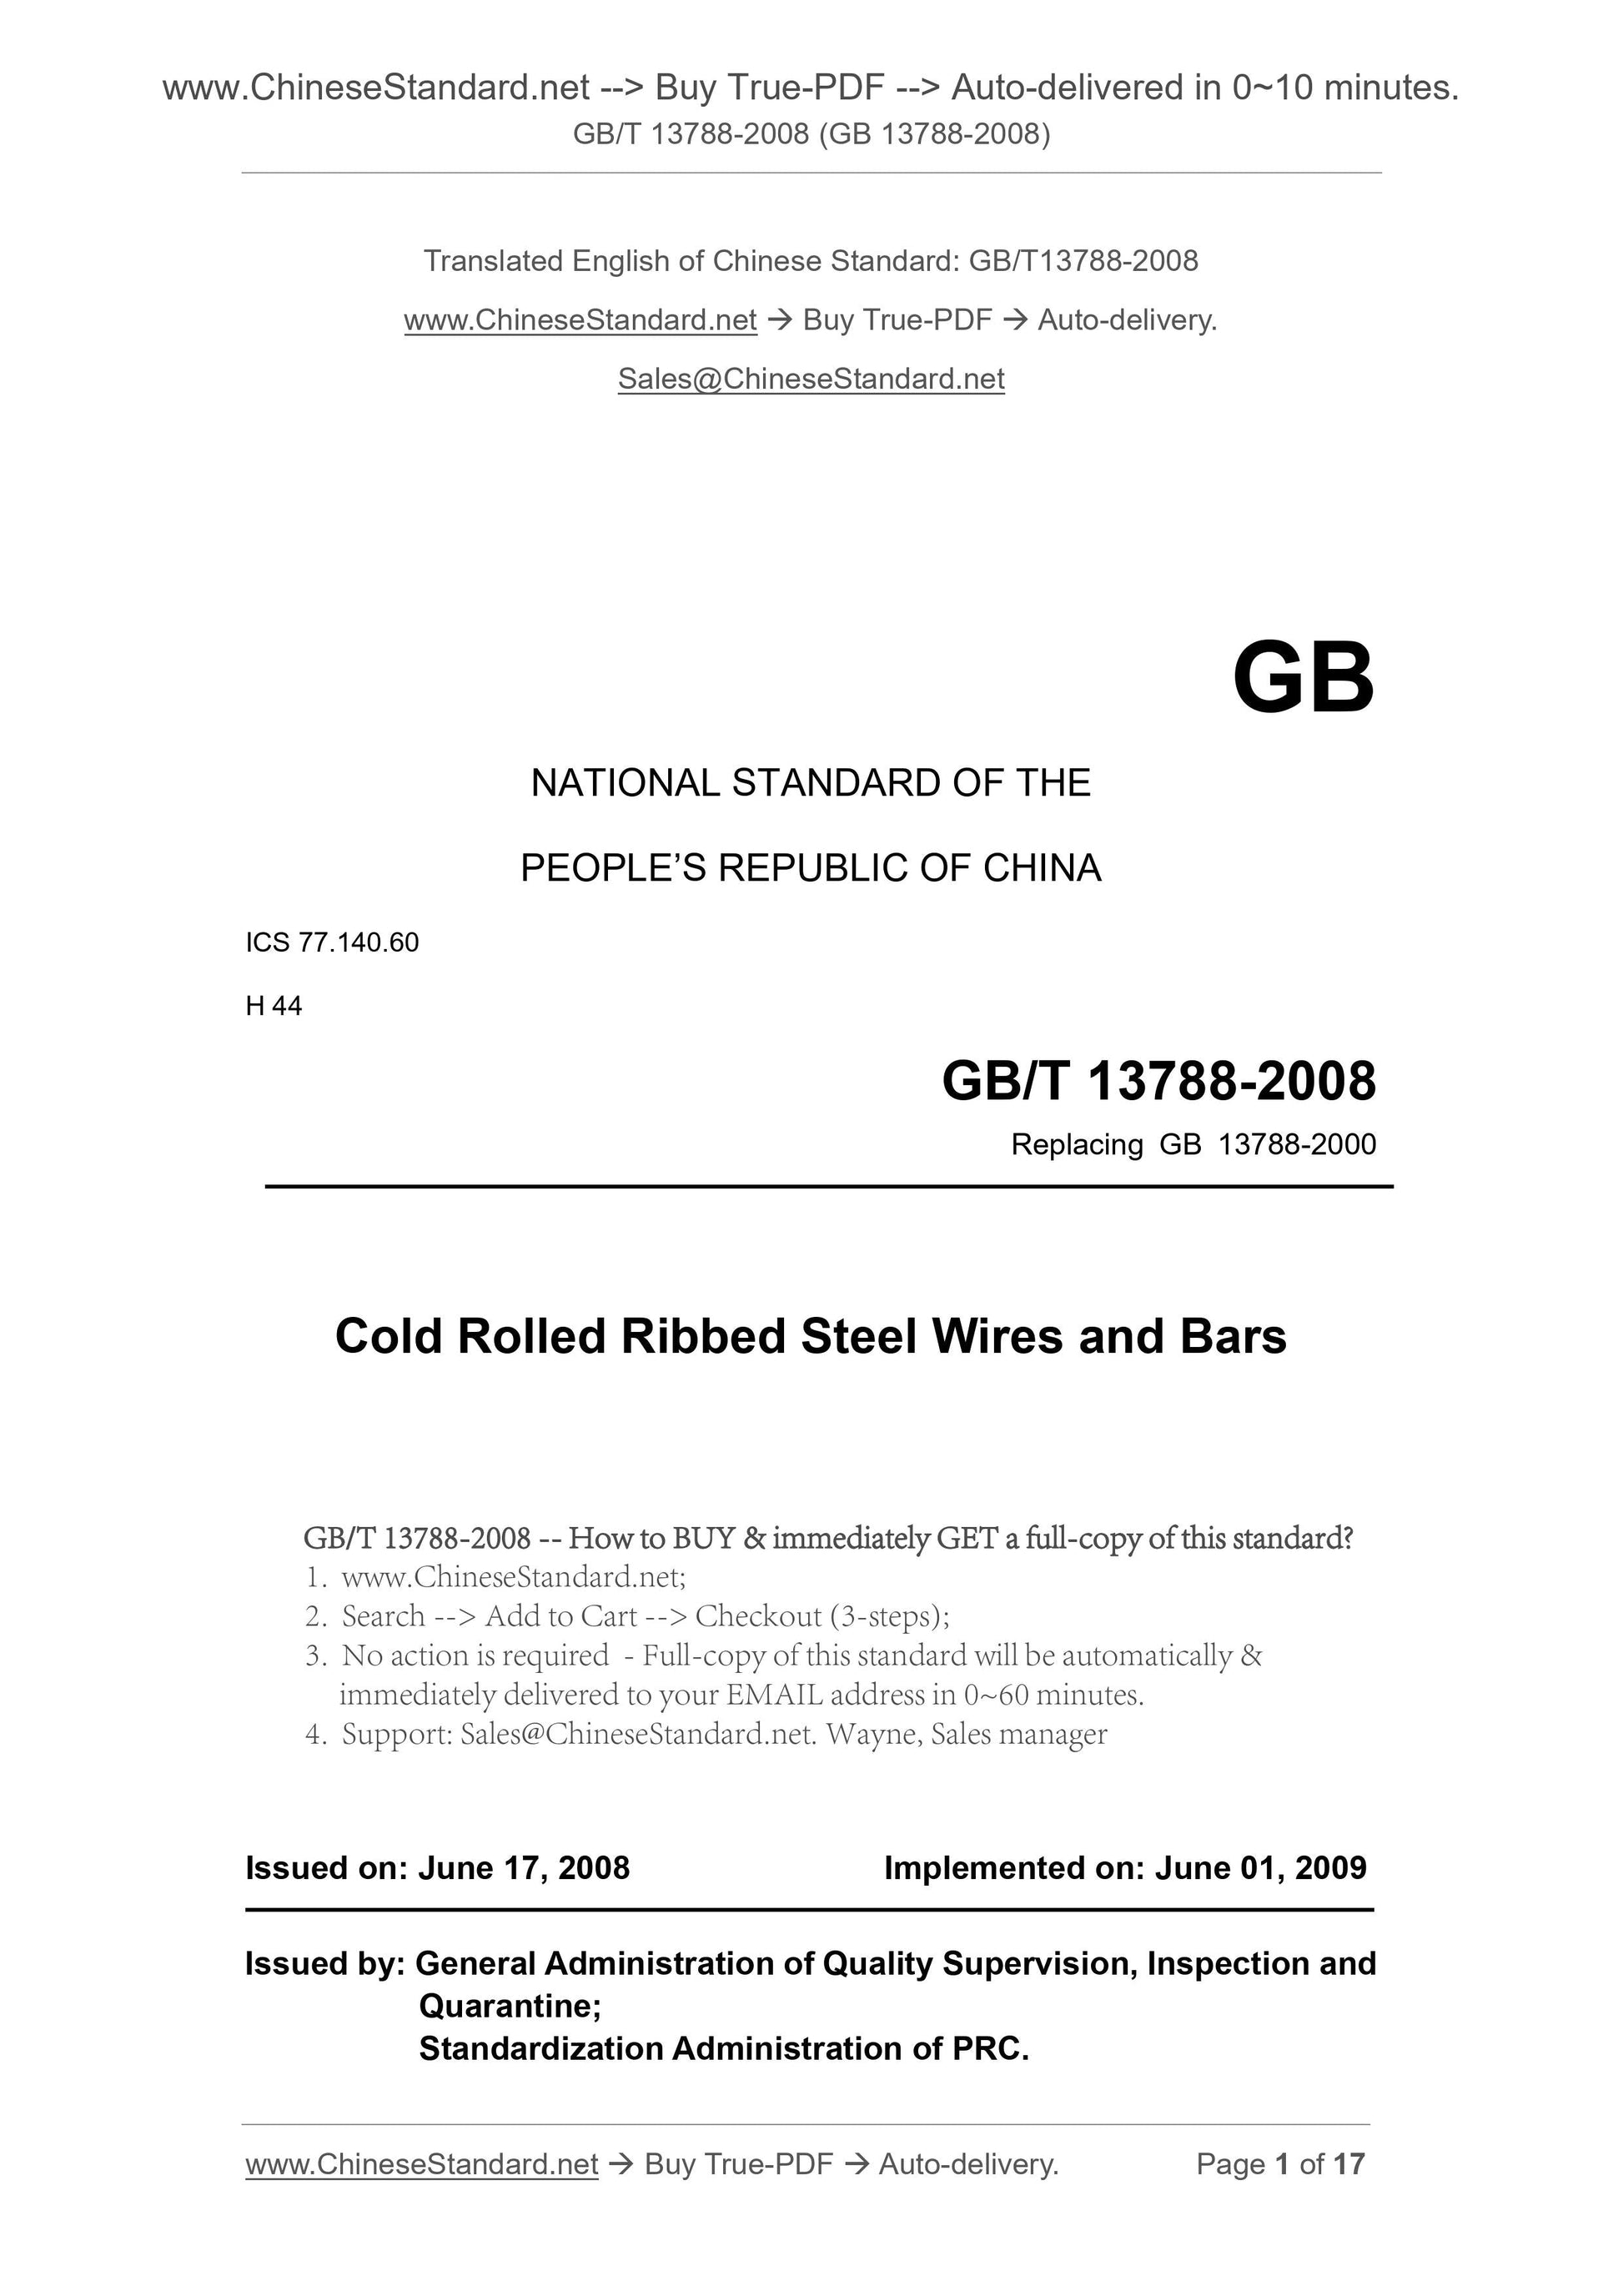 GB 13788-2008 Page 1